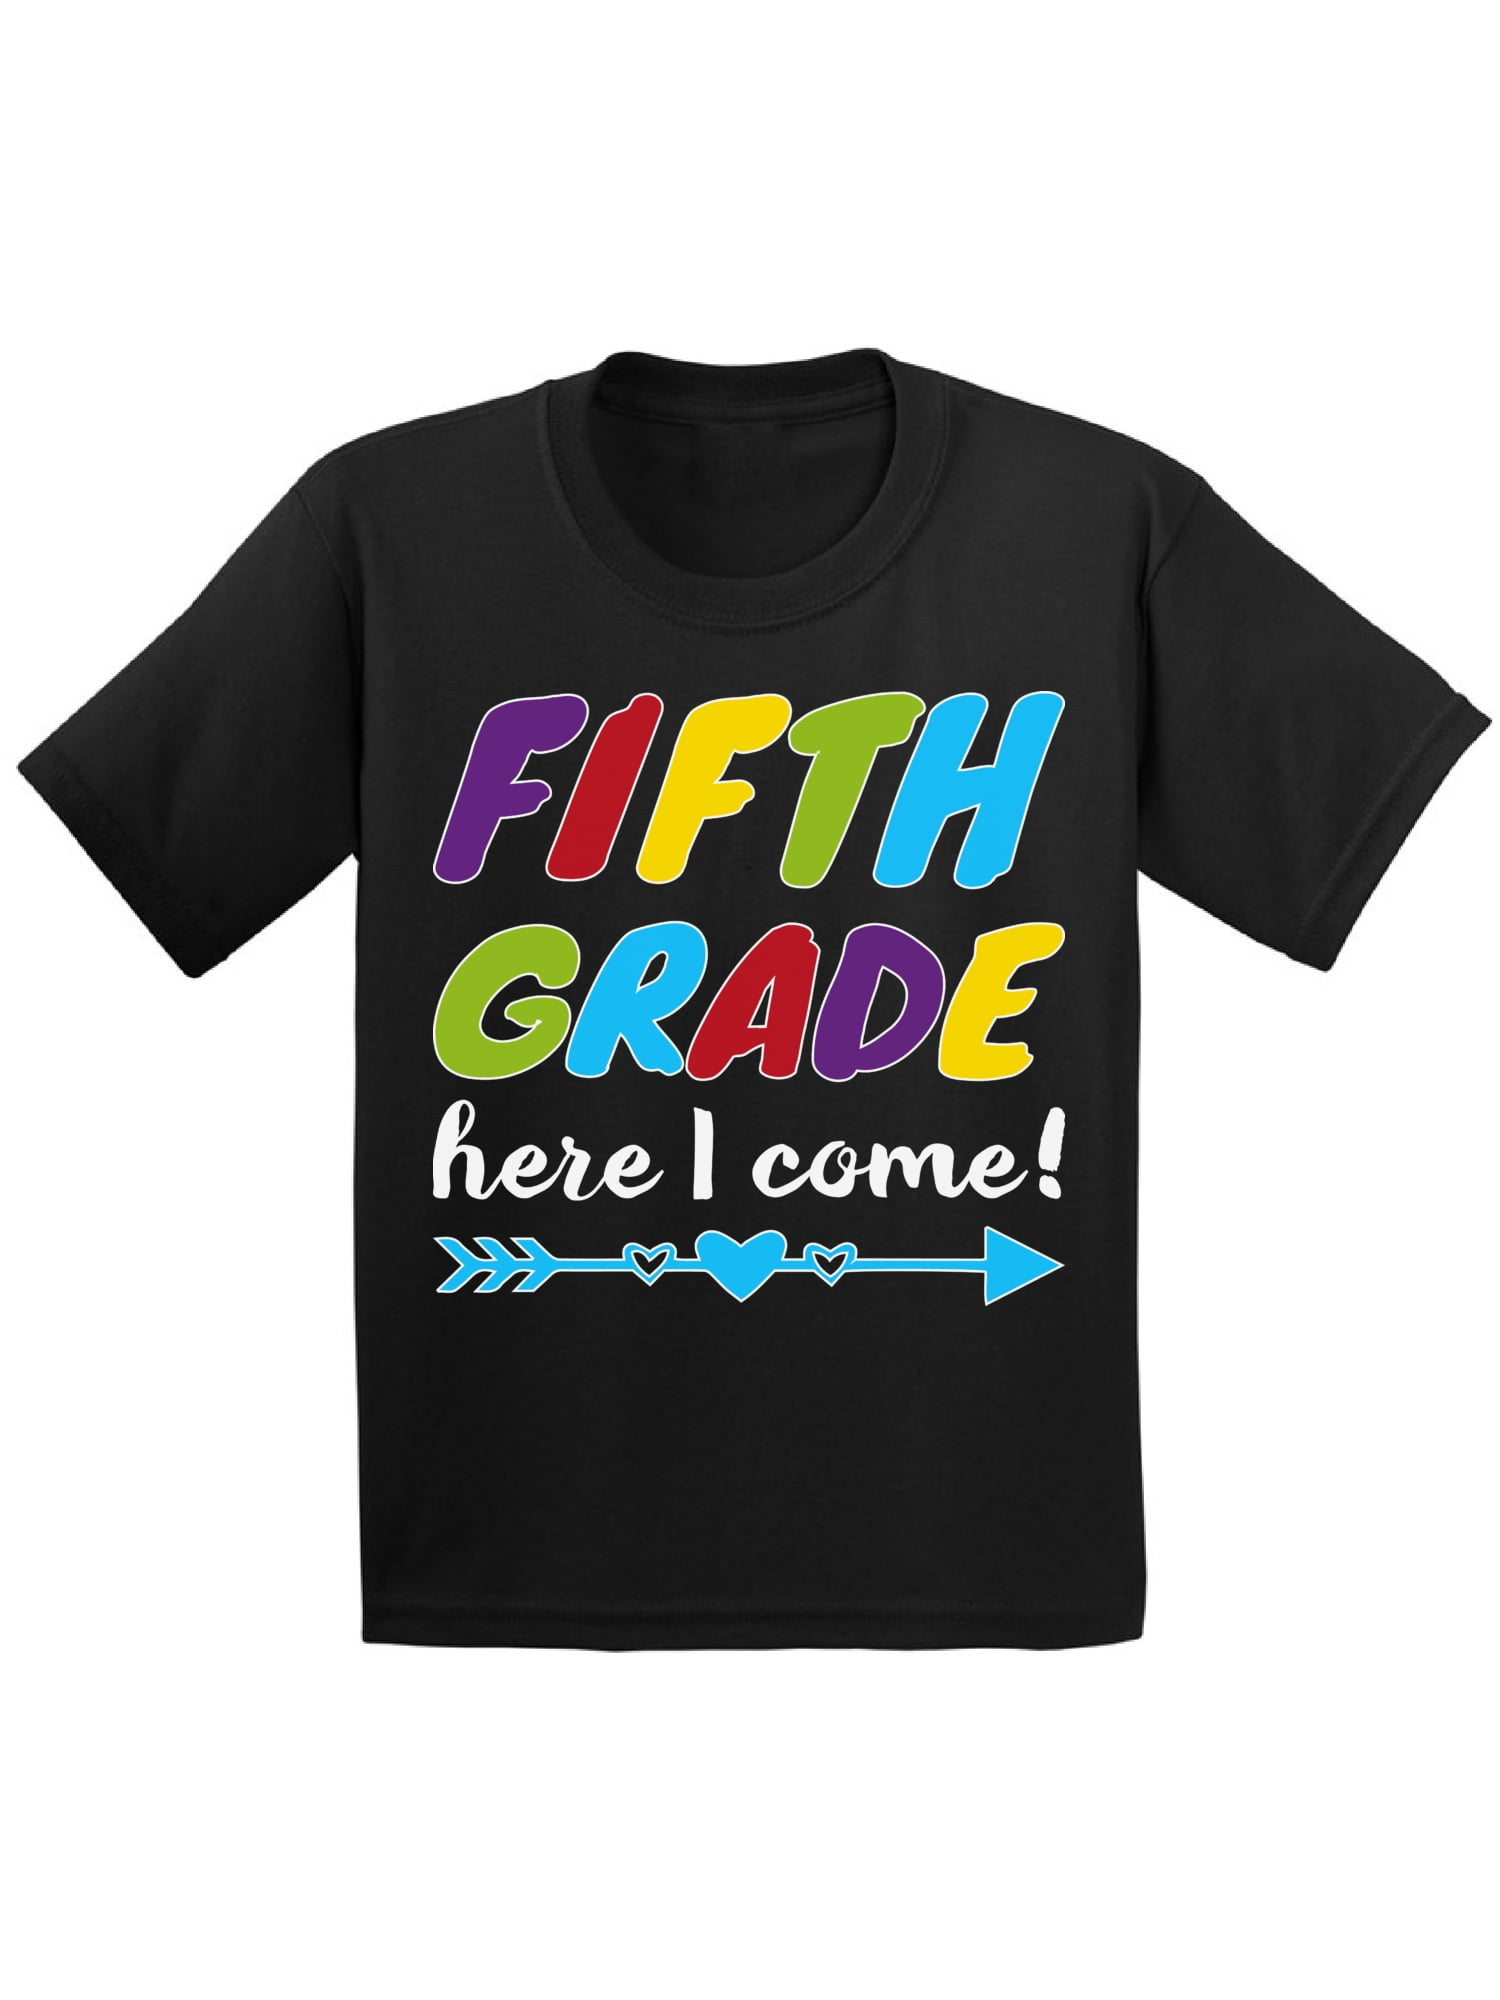 Awkward Styles - Back to School Shirts for 5th Grader Shirt Kids First ...